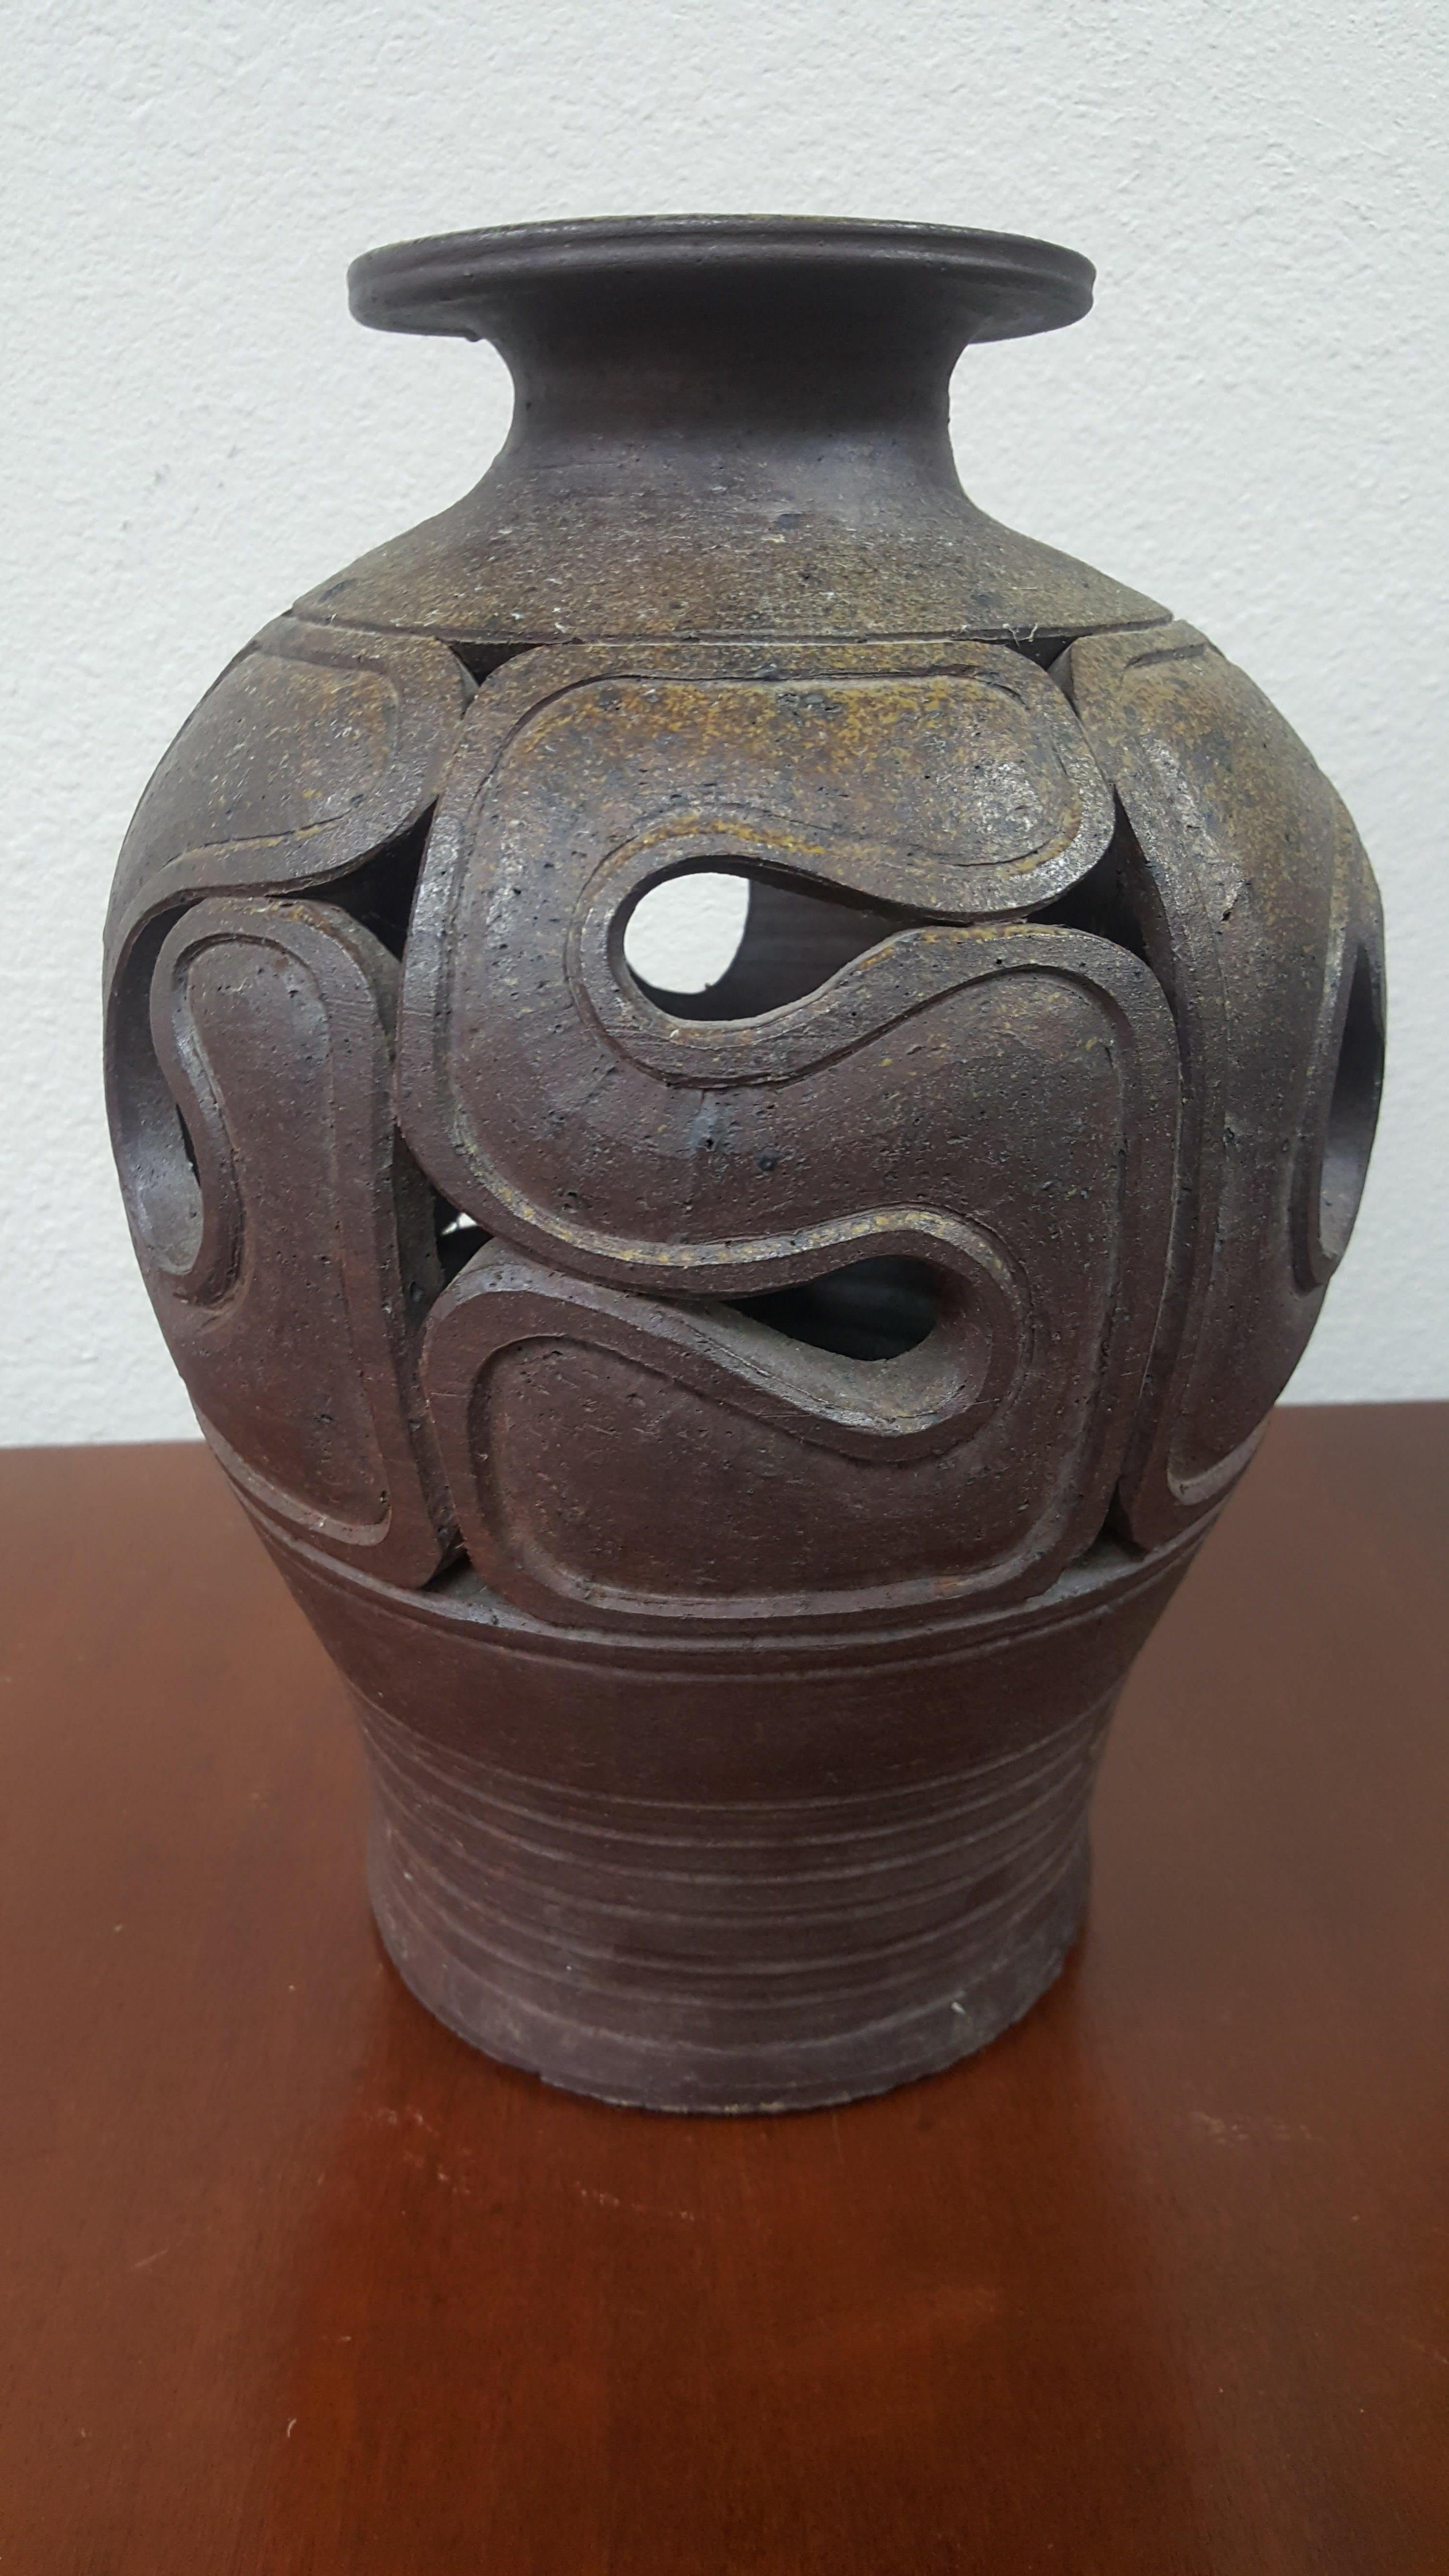 Stoneware vase vintage 1960s stoneware vase.

Excellent craftsmanship, excellent excellent condition, excellent example of Mid-Century Modern artistry captured in stoneware.
The handcrafted stoneware vase has a beautiful sculpted design.
I see no